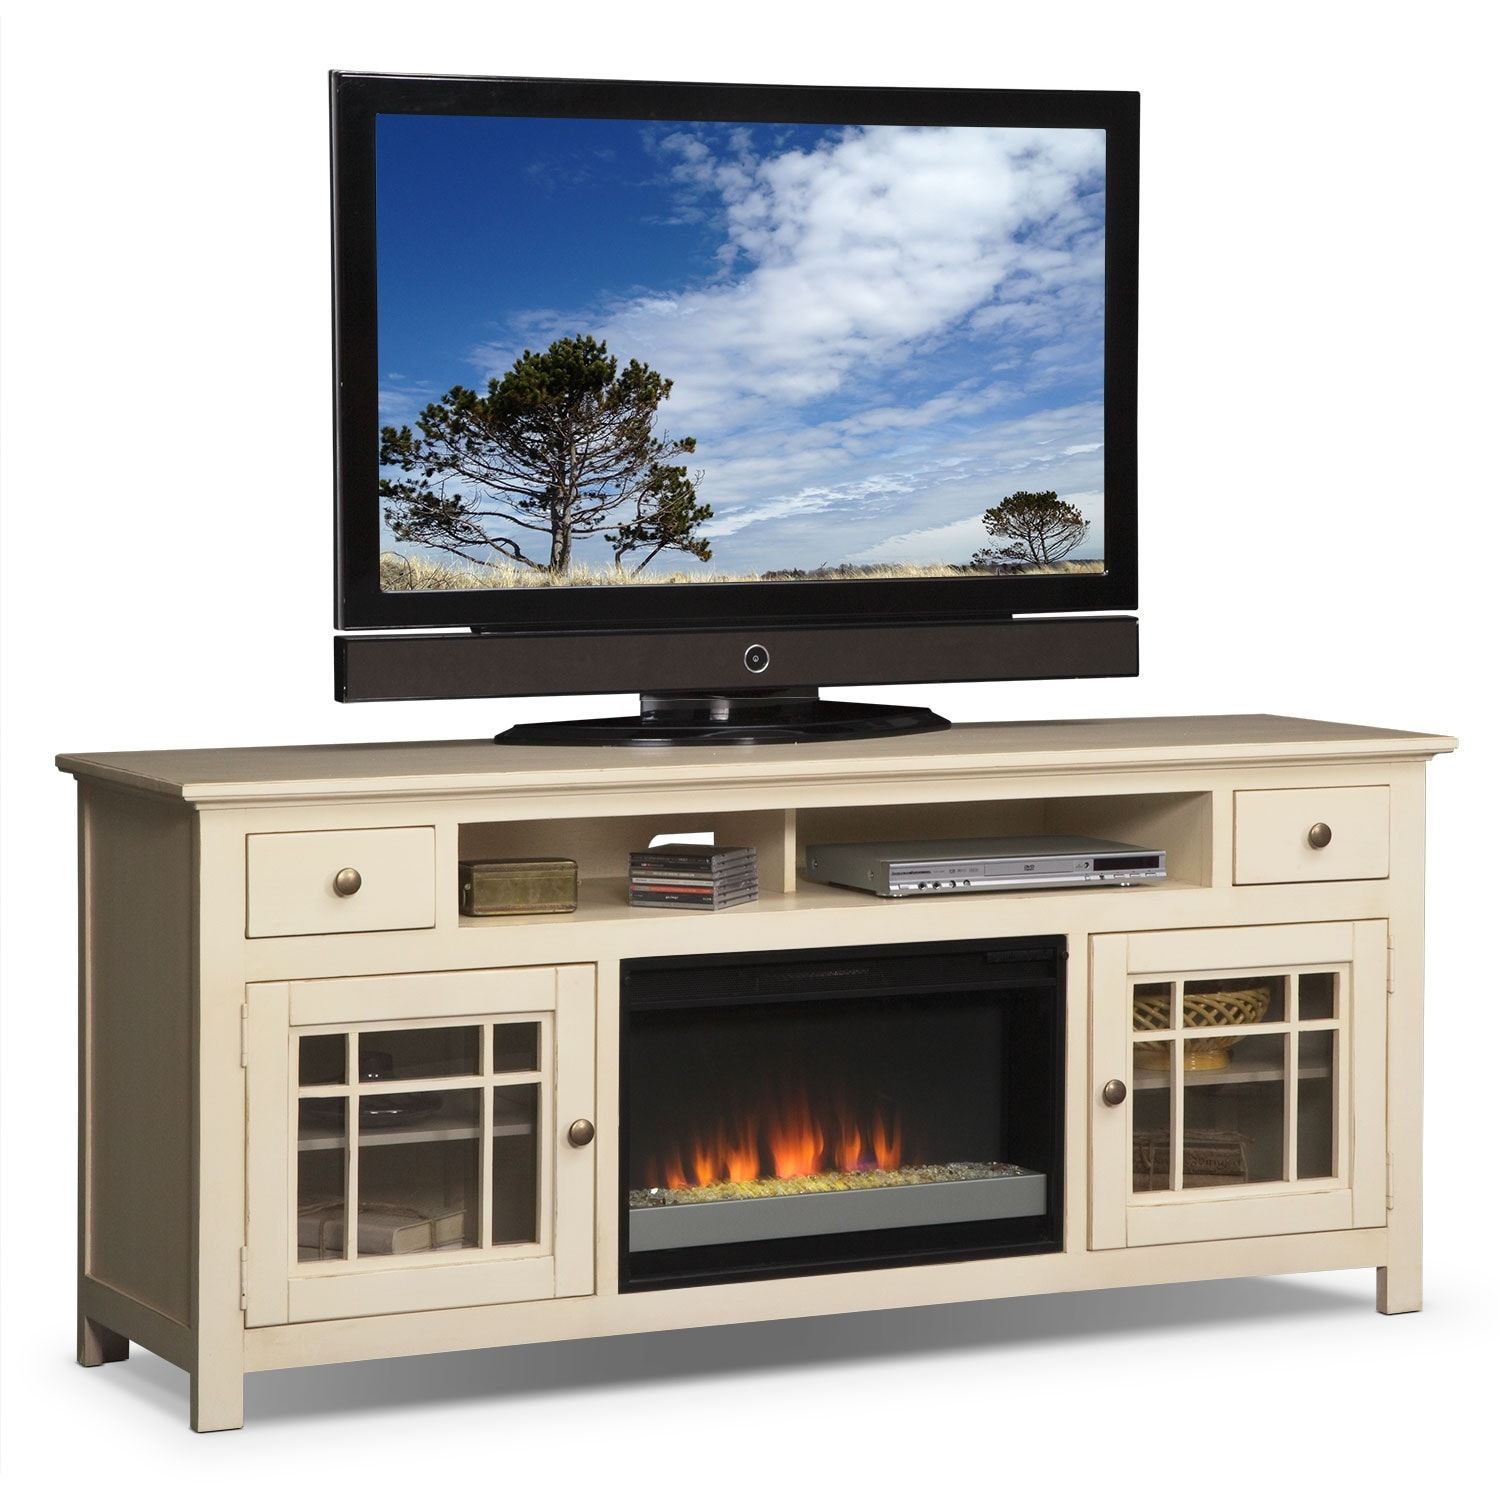 Merrick 74" Fireplace Tv Stand With Contemporary Insert – White Throughout Modern Fireplace Tv Stands (Gallery 17 of 20)